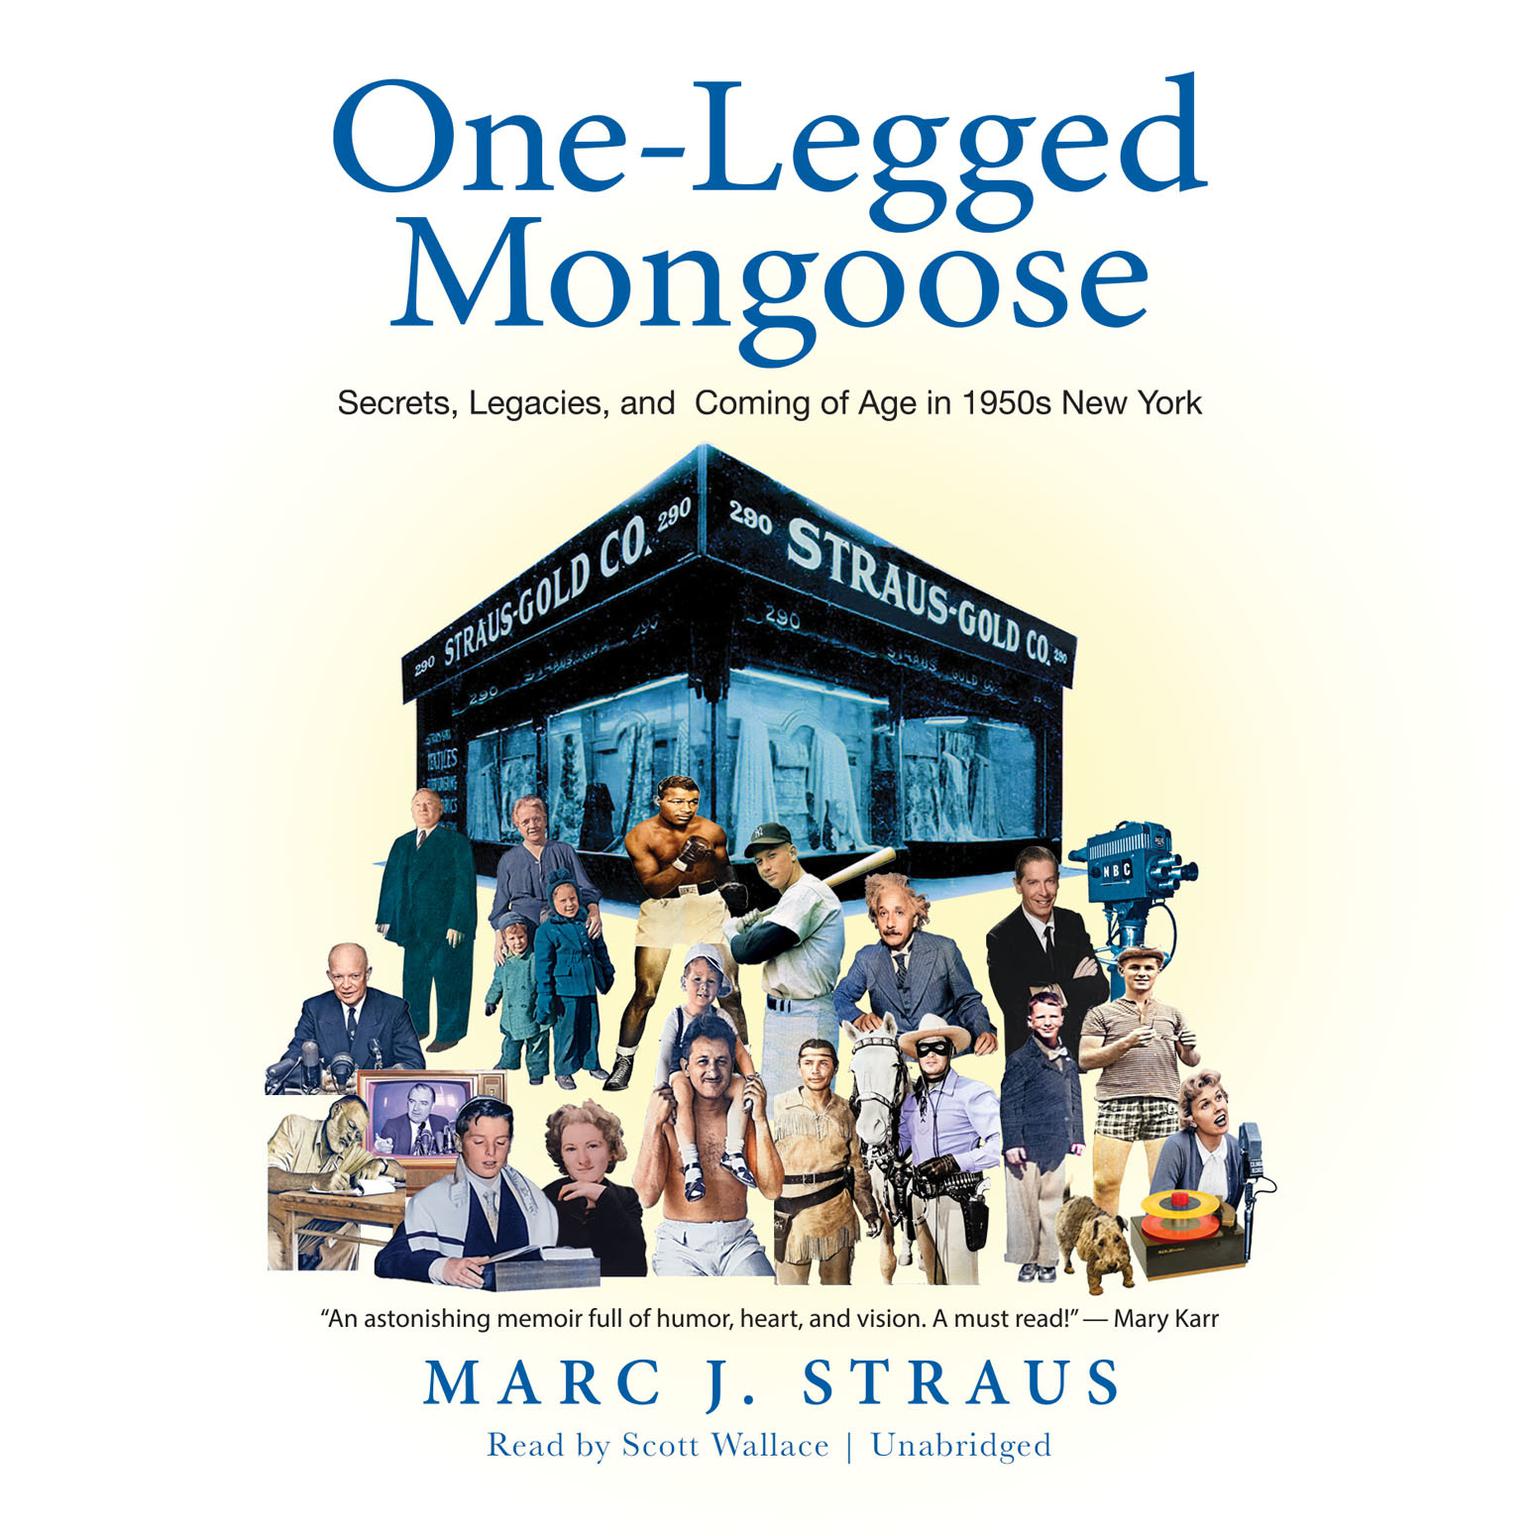 One-Legged Mongoose: Secrets, Legacies, and Coming of Age in 1950s New York Audiobook, by Marc J. Straus